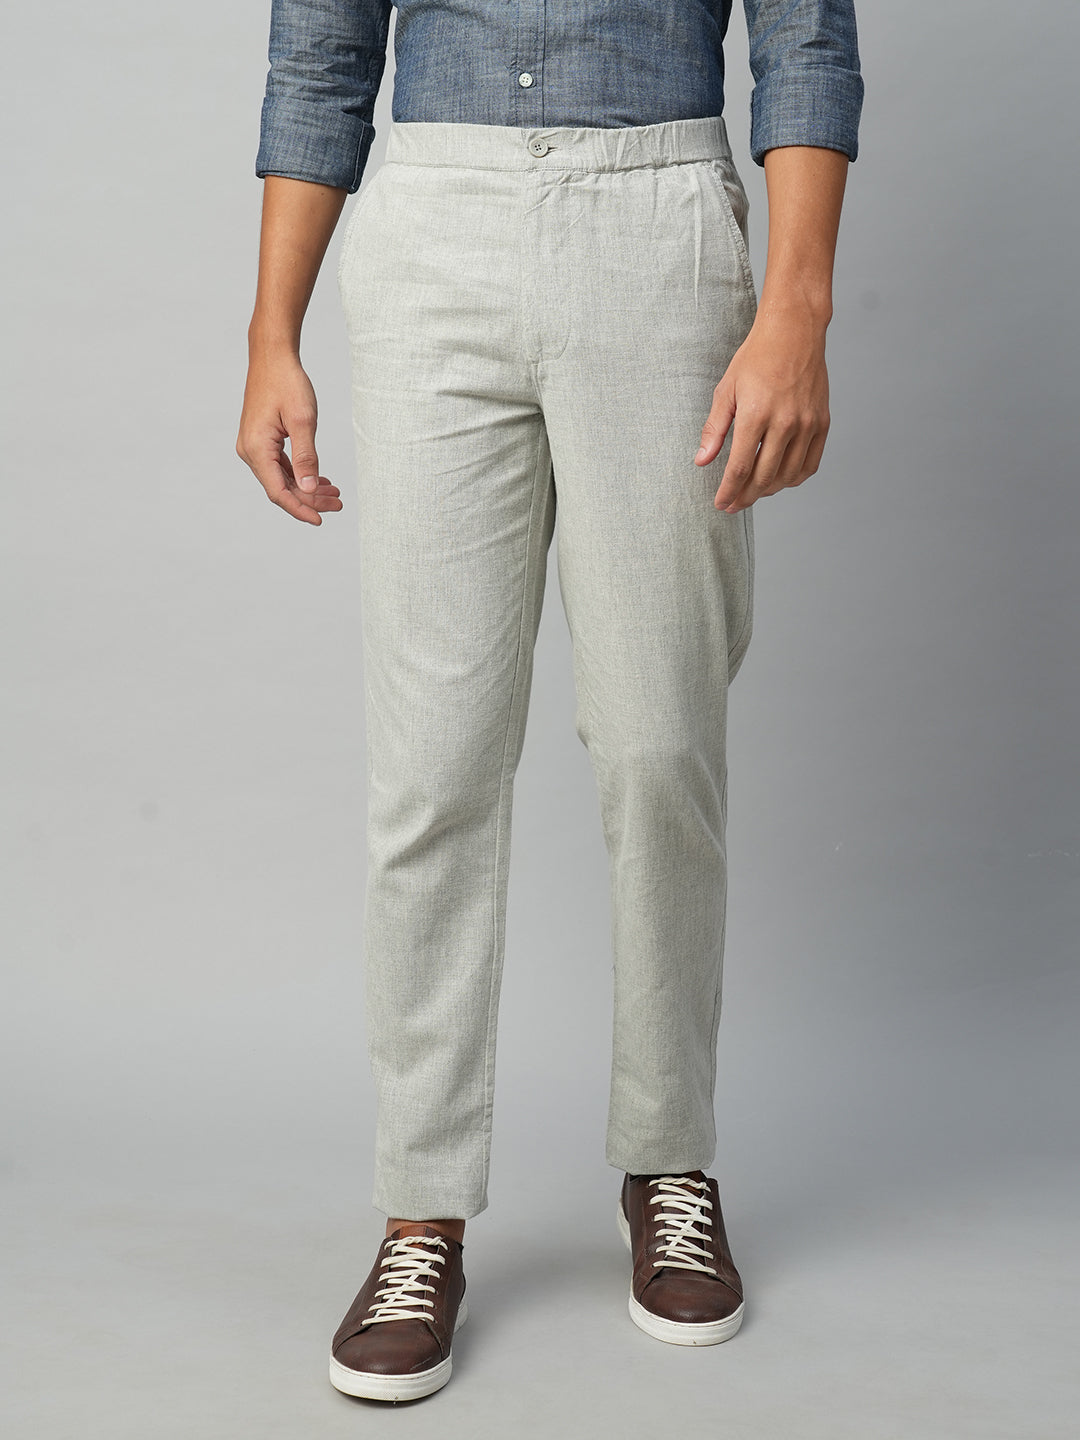 Share 70+ white linen trousers india - in.cdgdbentre